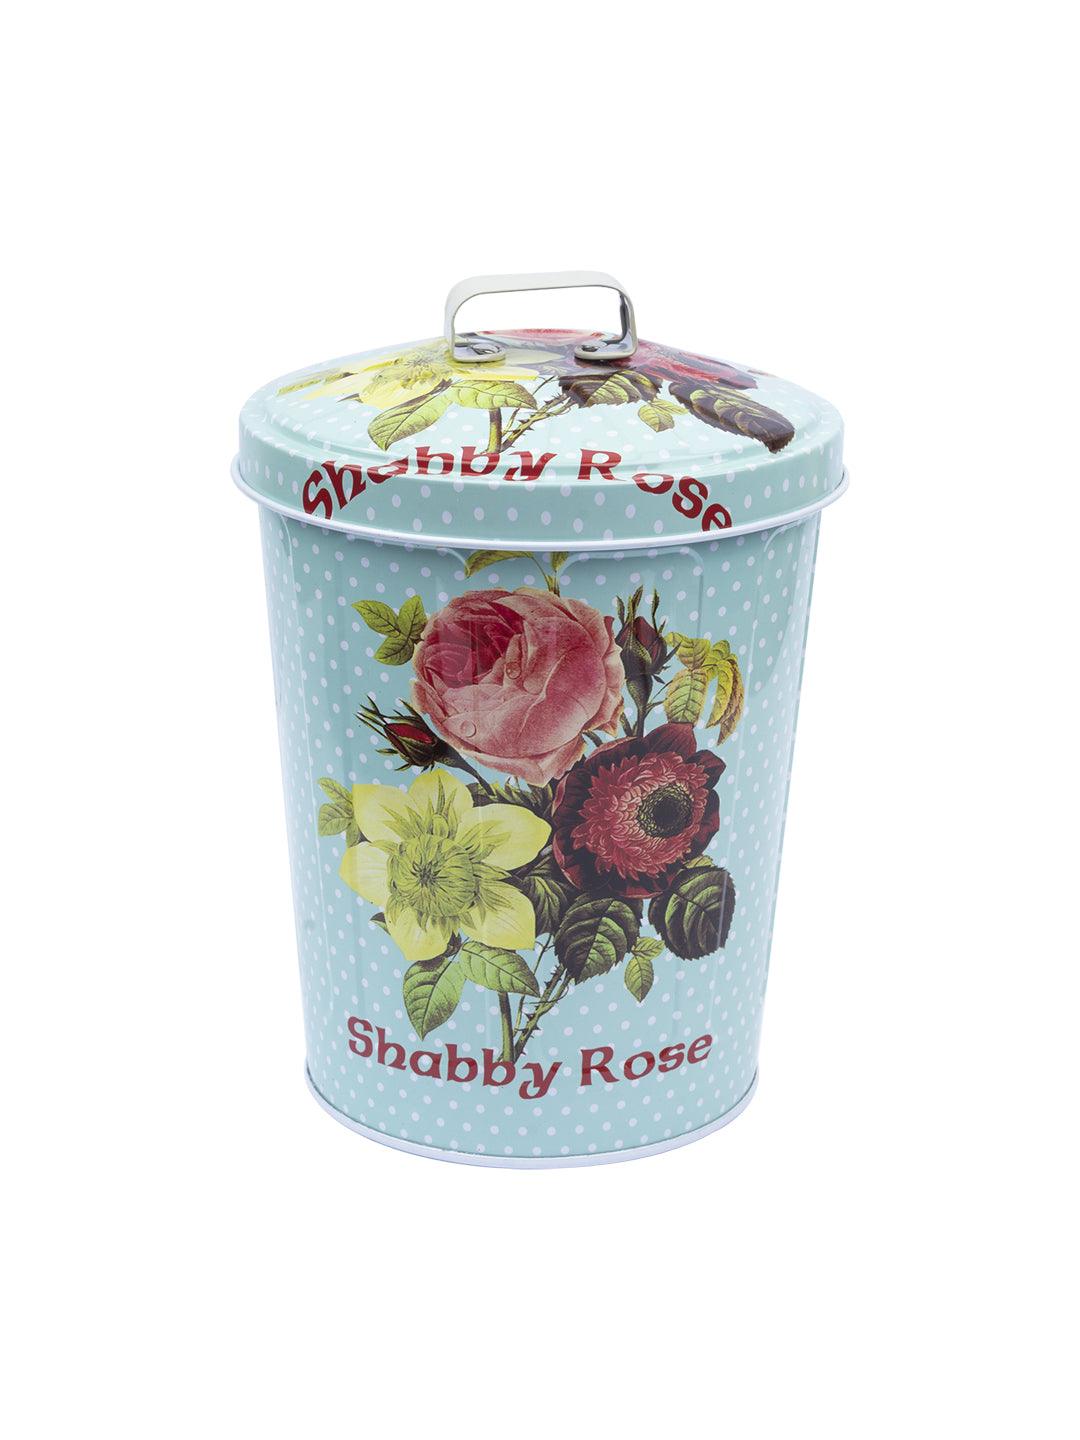 "Shabby Rose" Floral Design Canister With Lid - Cyan - MARKET 99